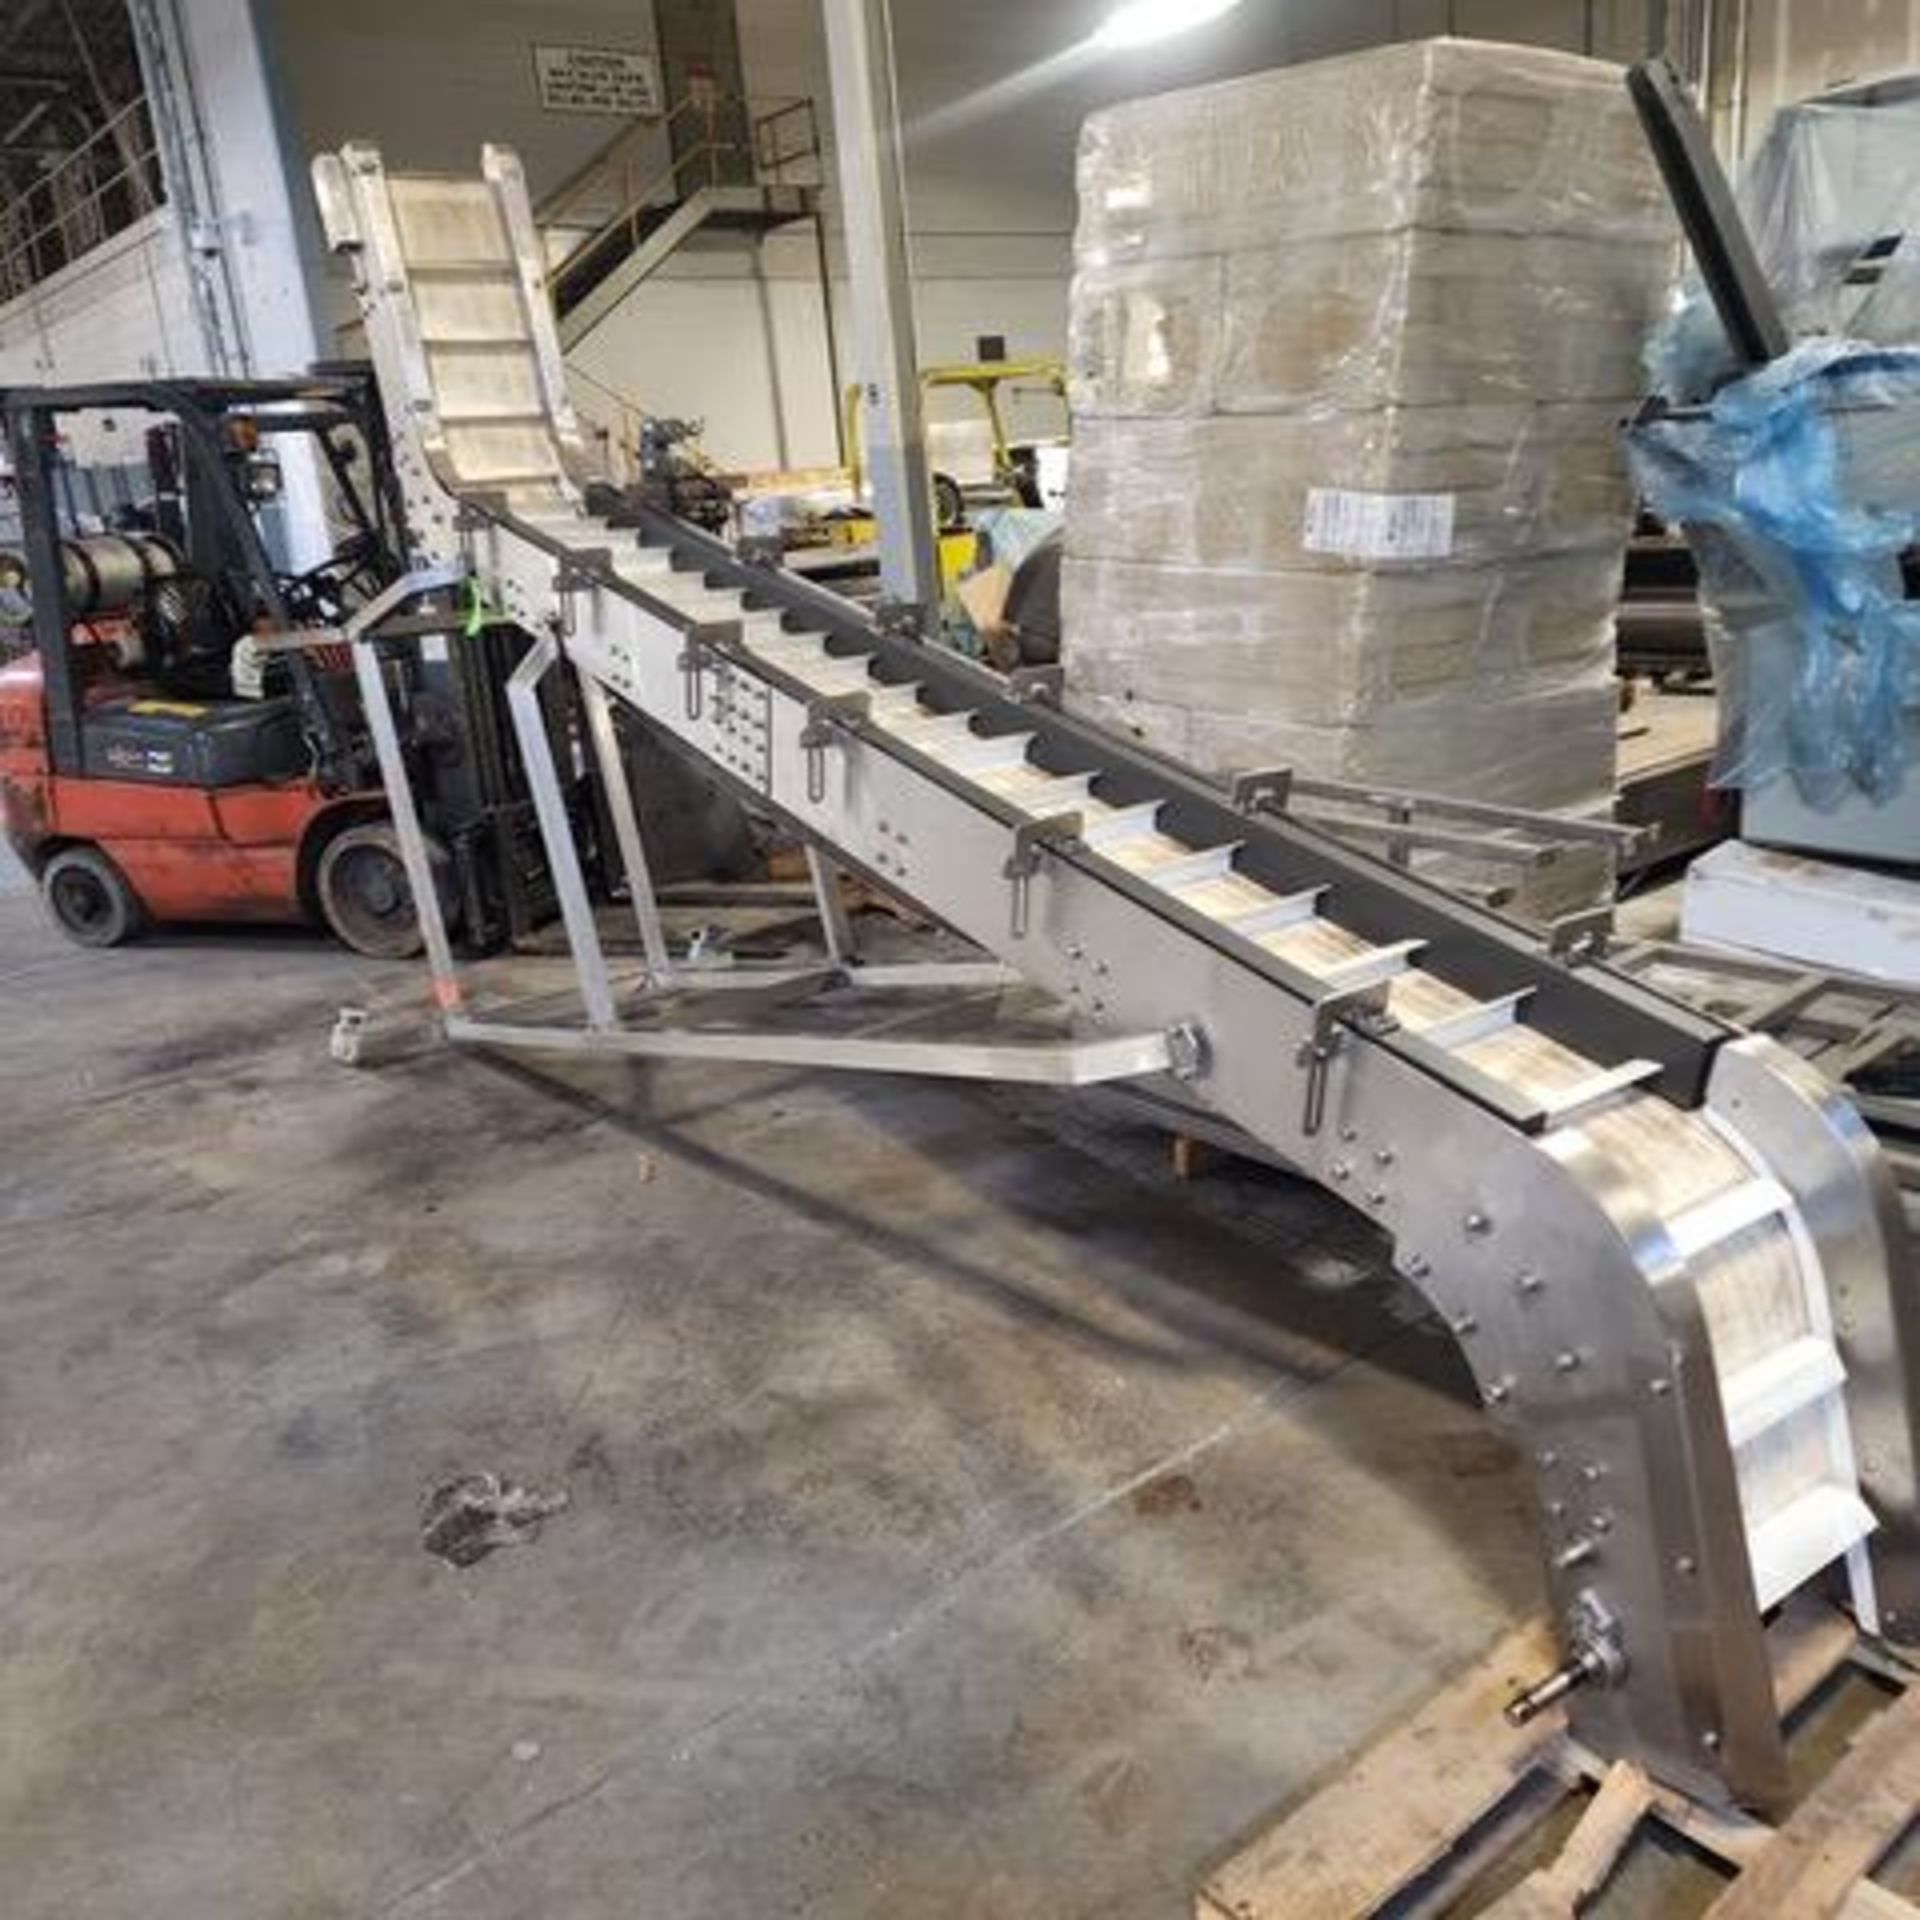 Stainless Steel Incline Conveyor, Used to Feed Bagger Scales | Rig Fee $150